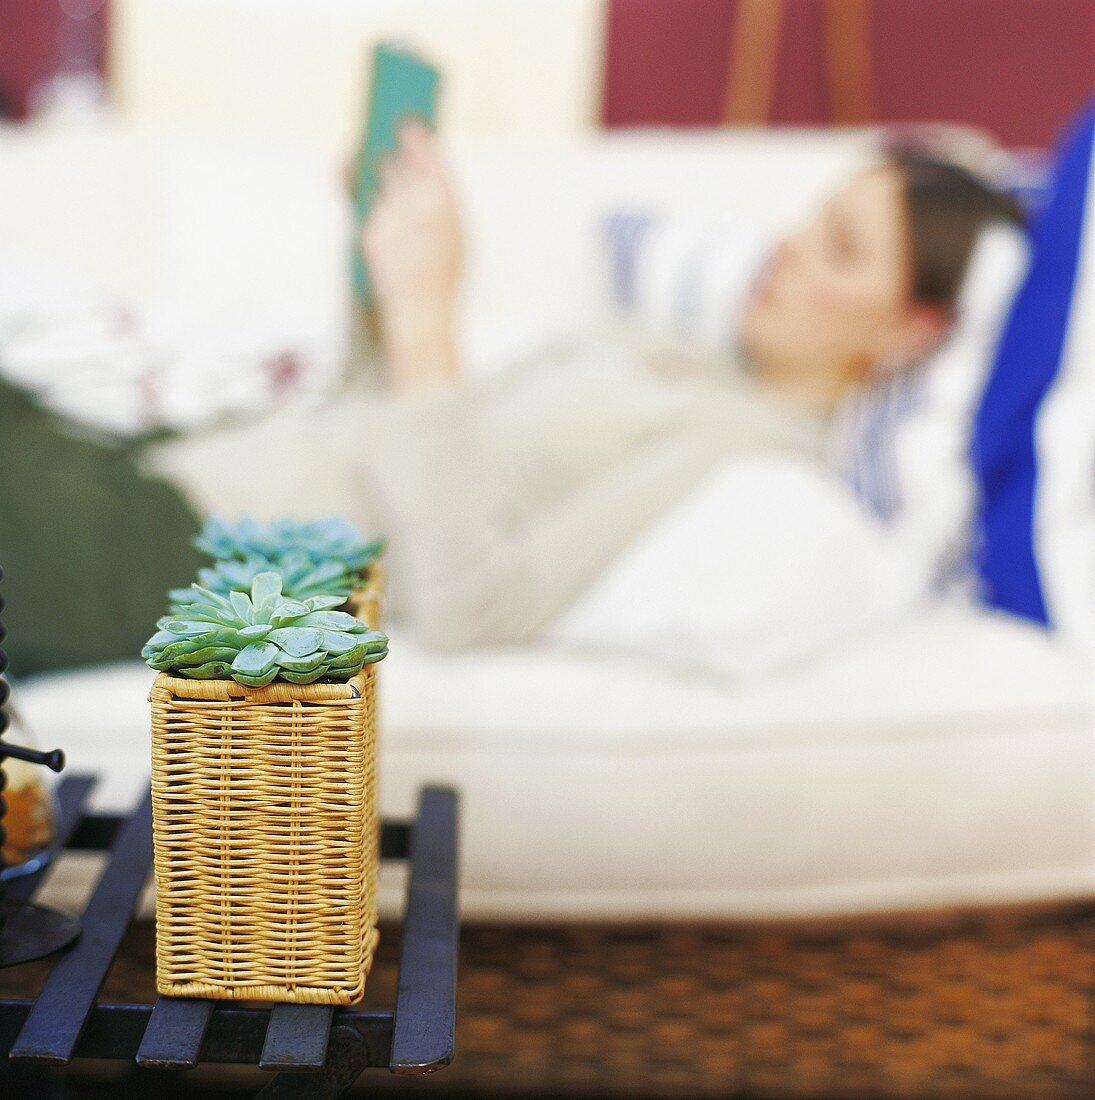 Plant in basket, woman lying on sofa reading in background